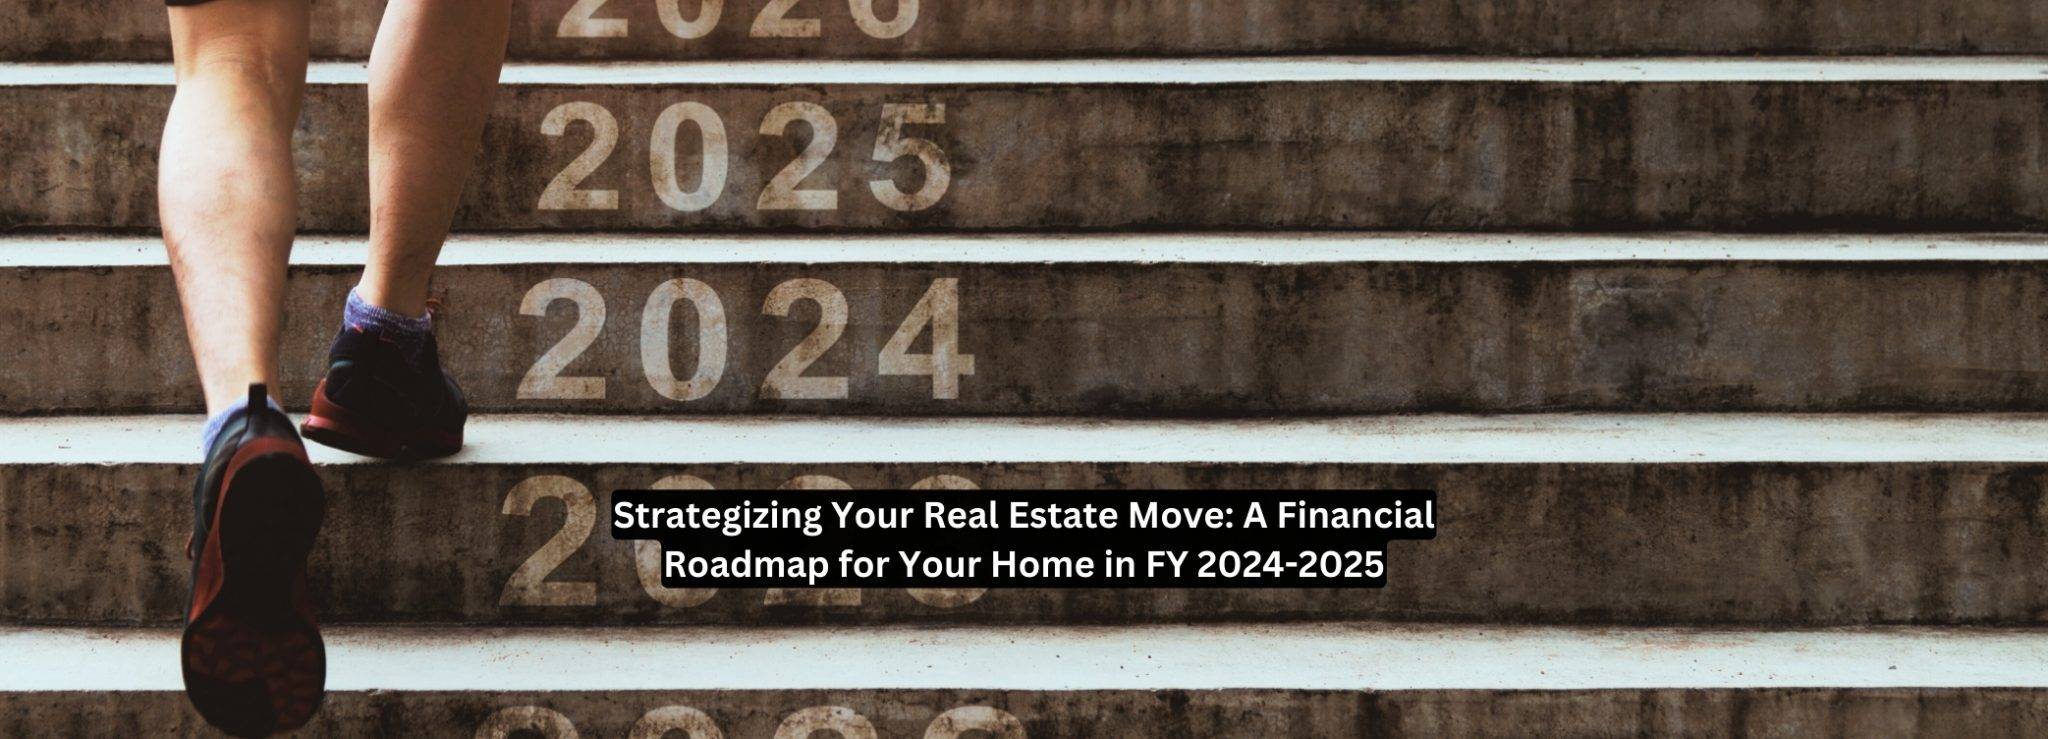 Strategizing Your Real Estate Move: A Financial Roadmap for Your Home in FY 2024-2025